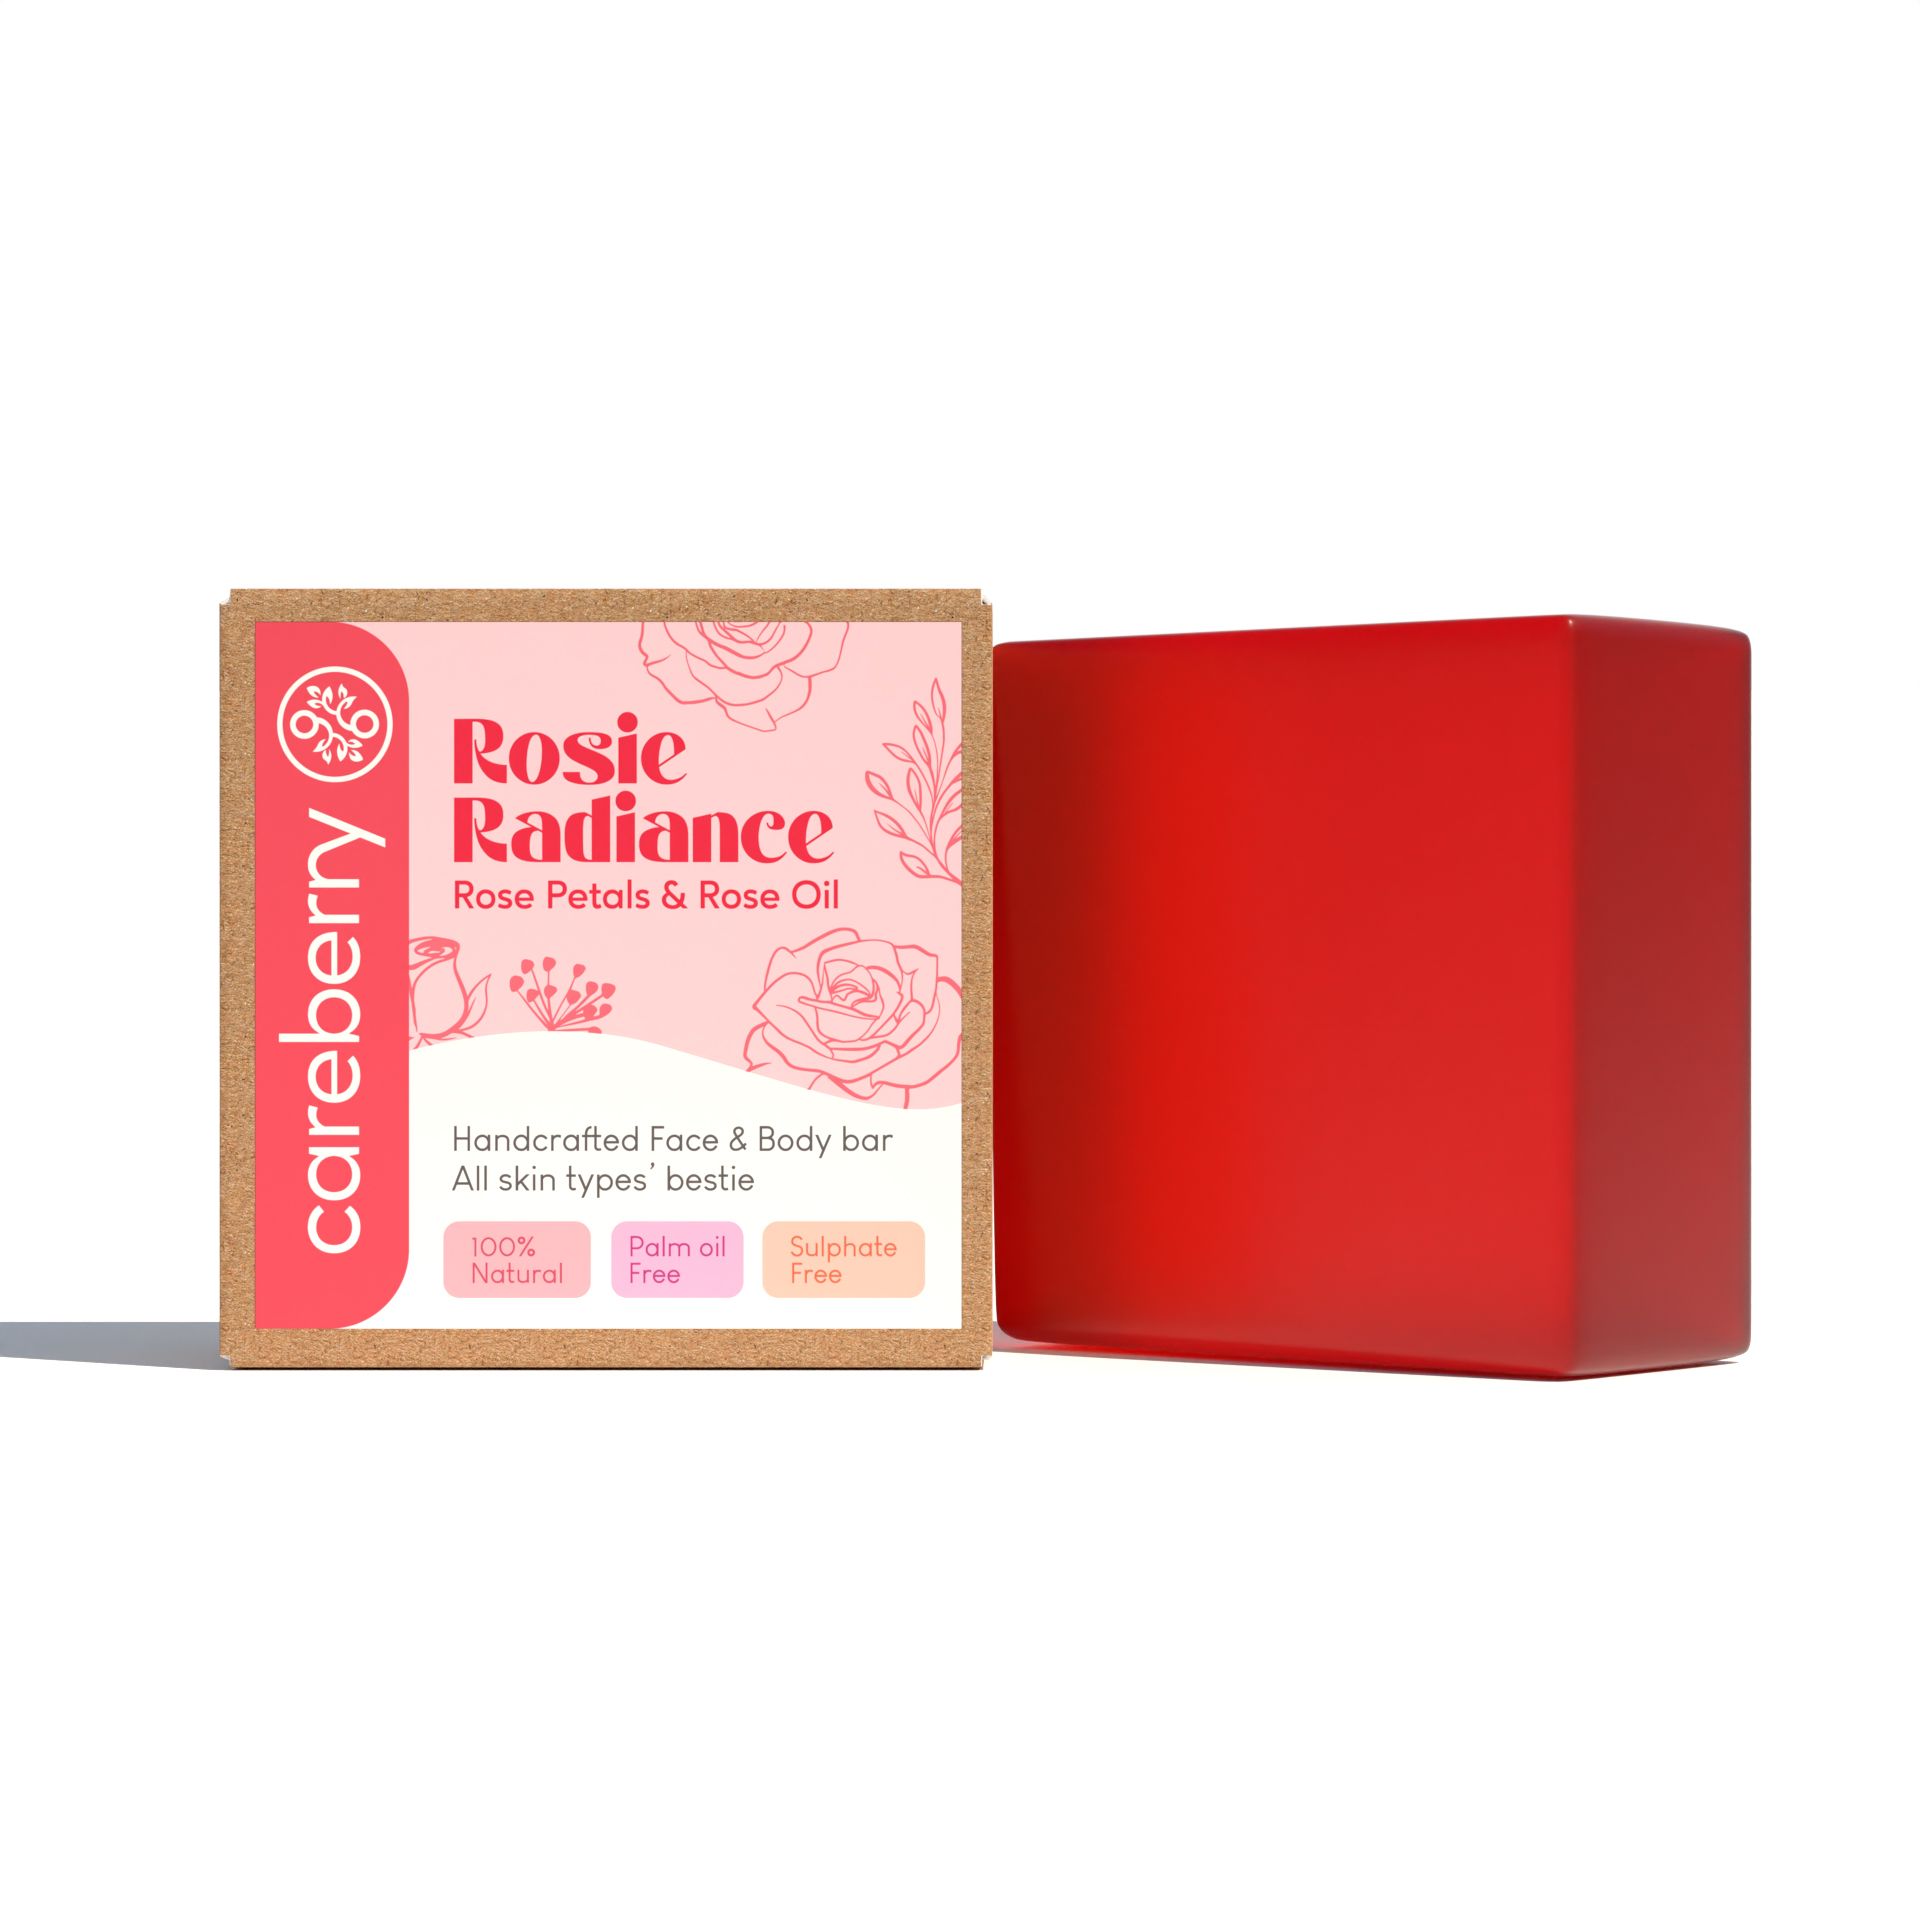 Careberry's Rosy Radiance Handcrafted Face & Body Bar | Gentle Cleanser with Rose Petals & Rose Oil for Radiant Skin, 100gm